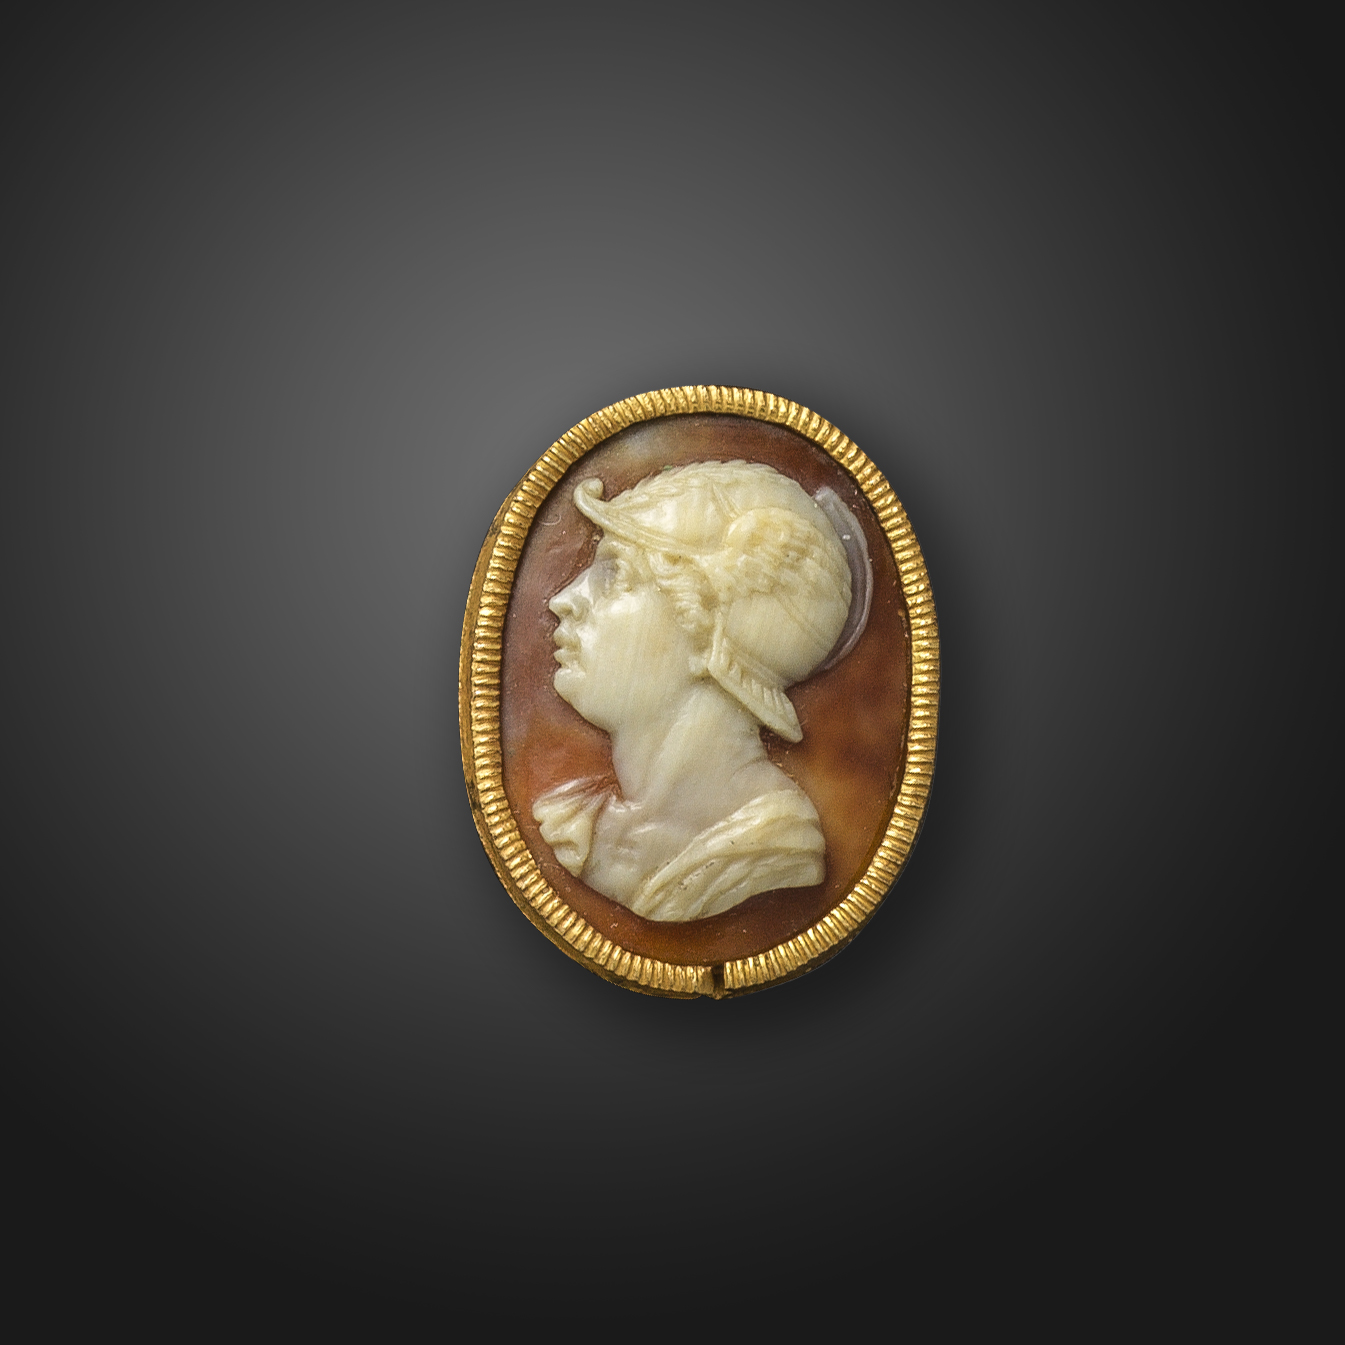 An early 18th century shell cameo depicting Mercury, in profile and with winged helmet, set in